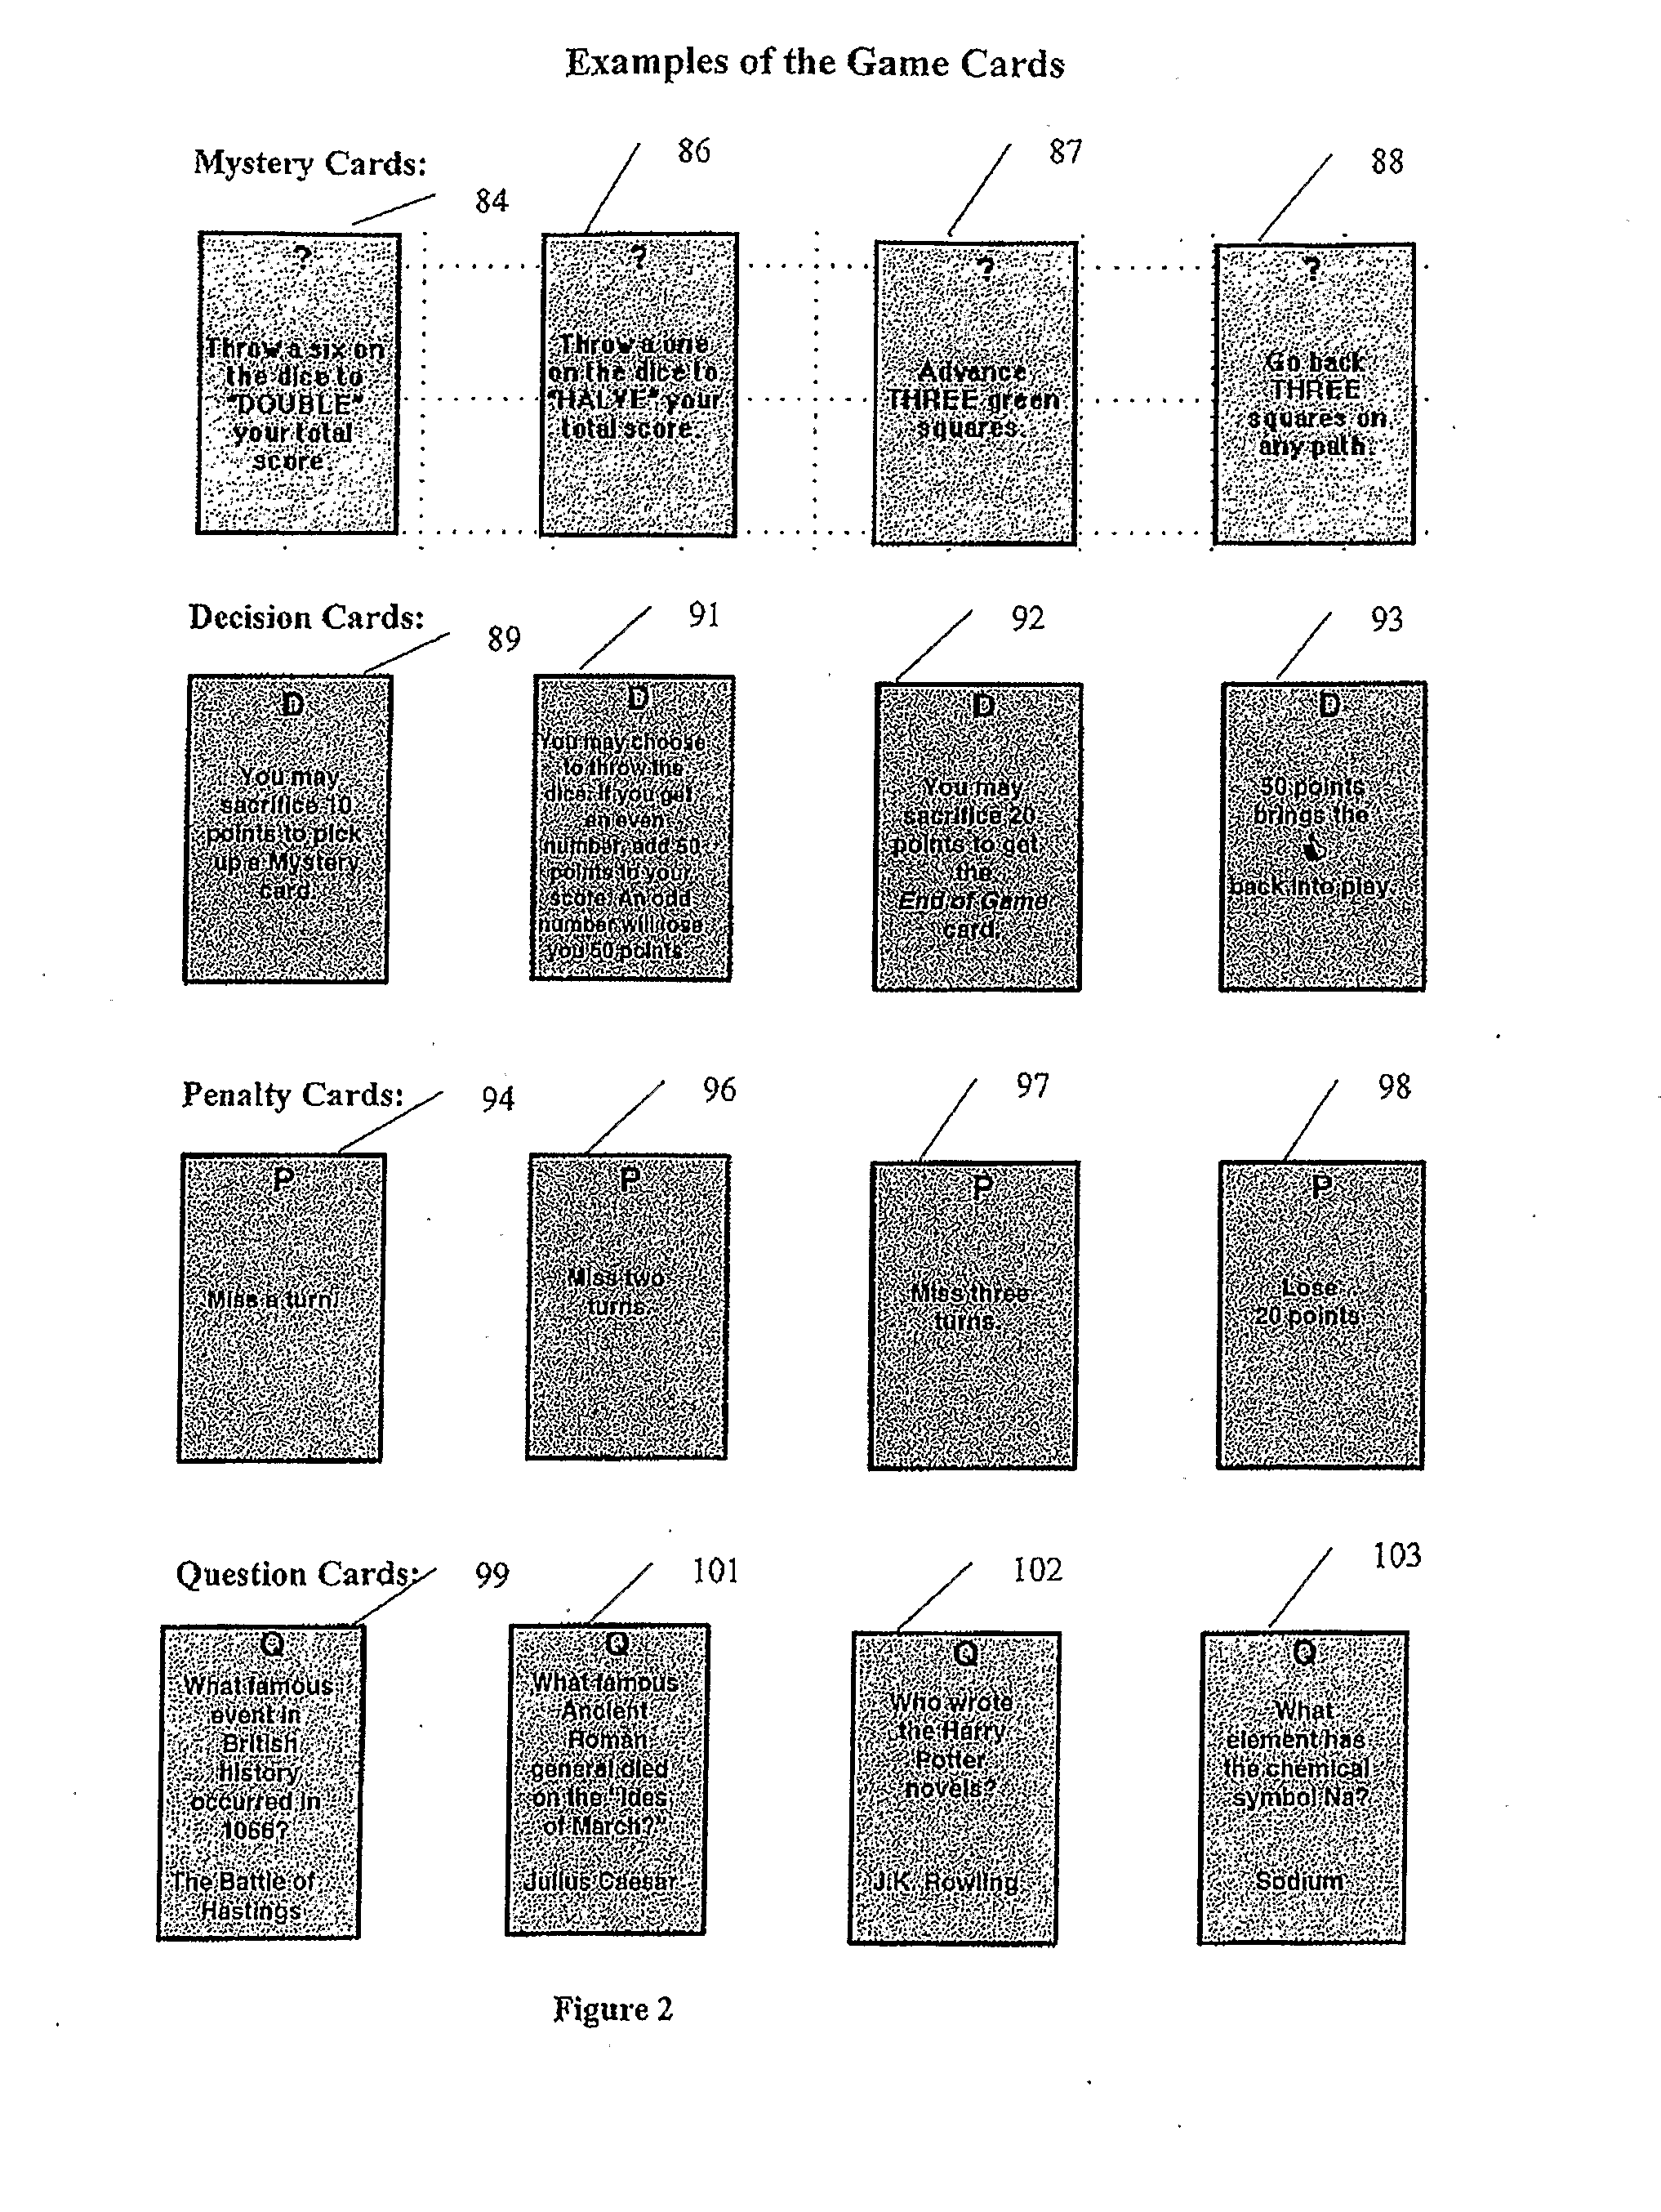 Method and apparatus for a board game